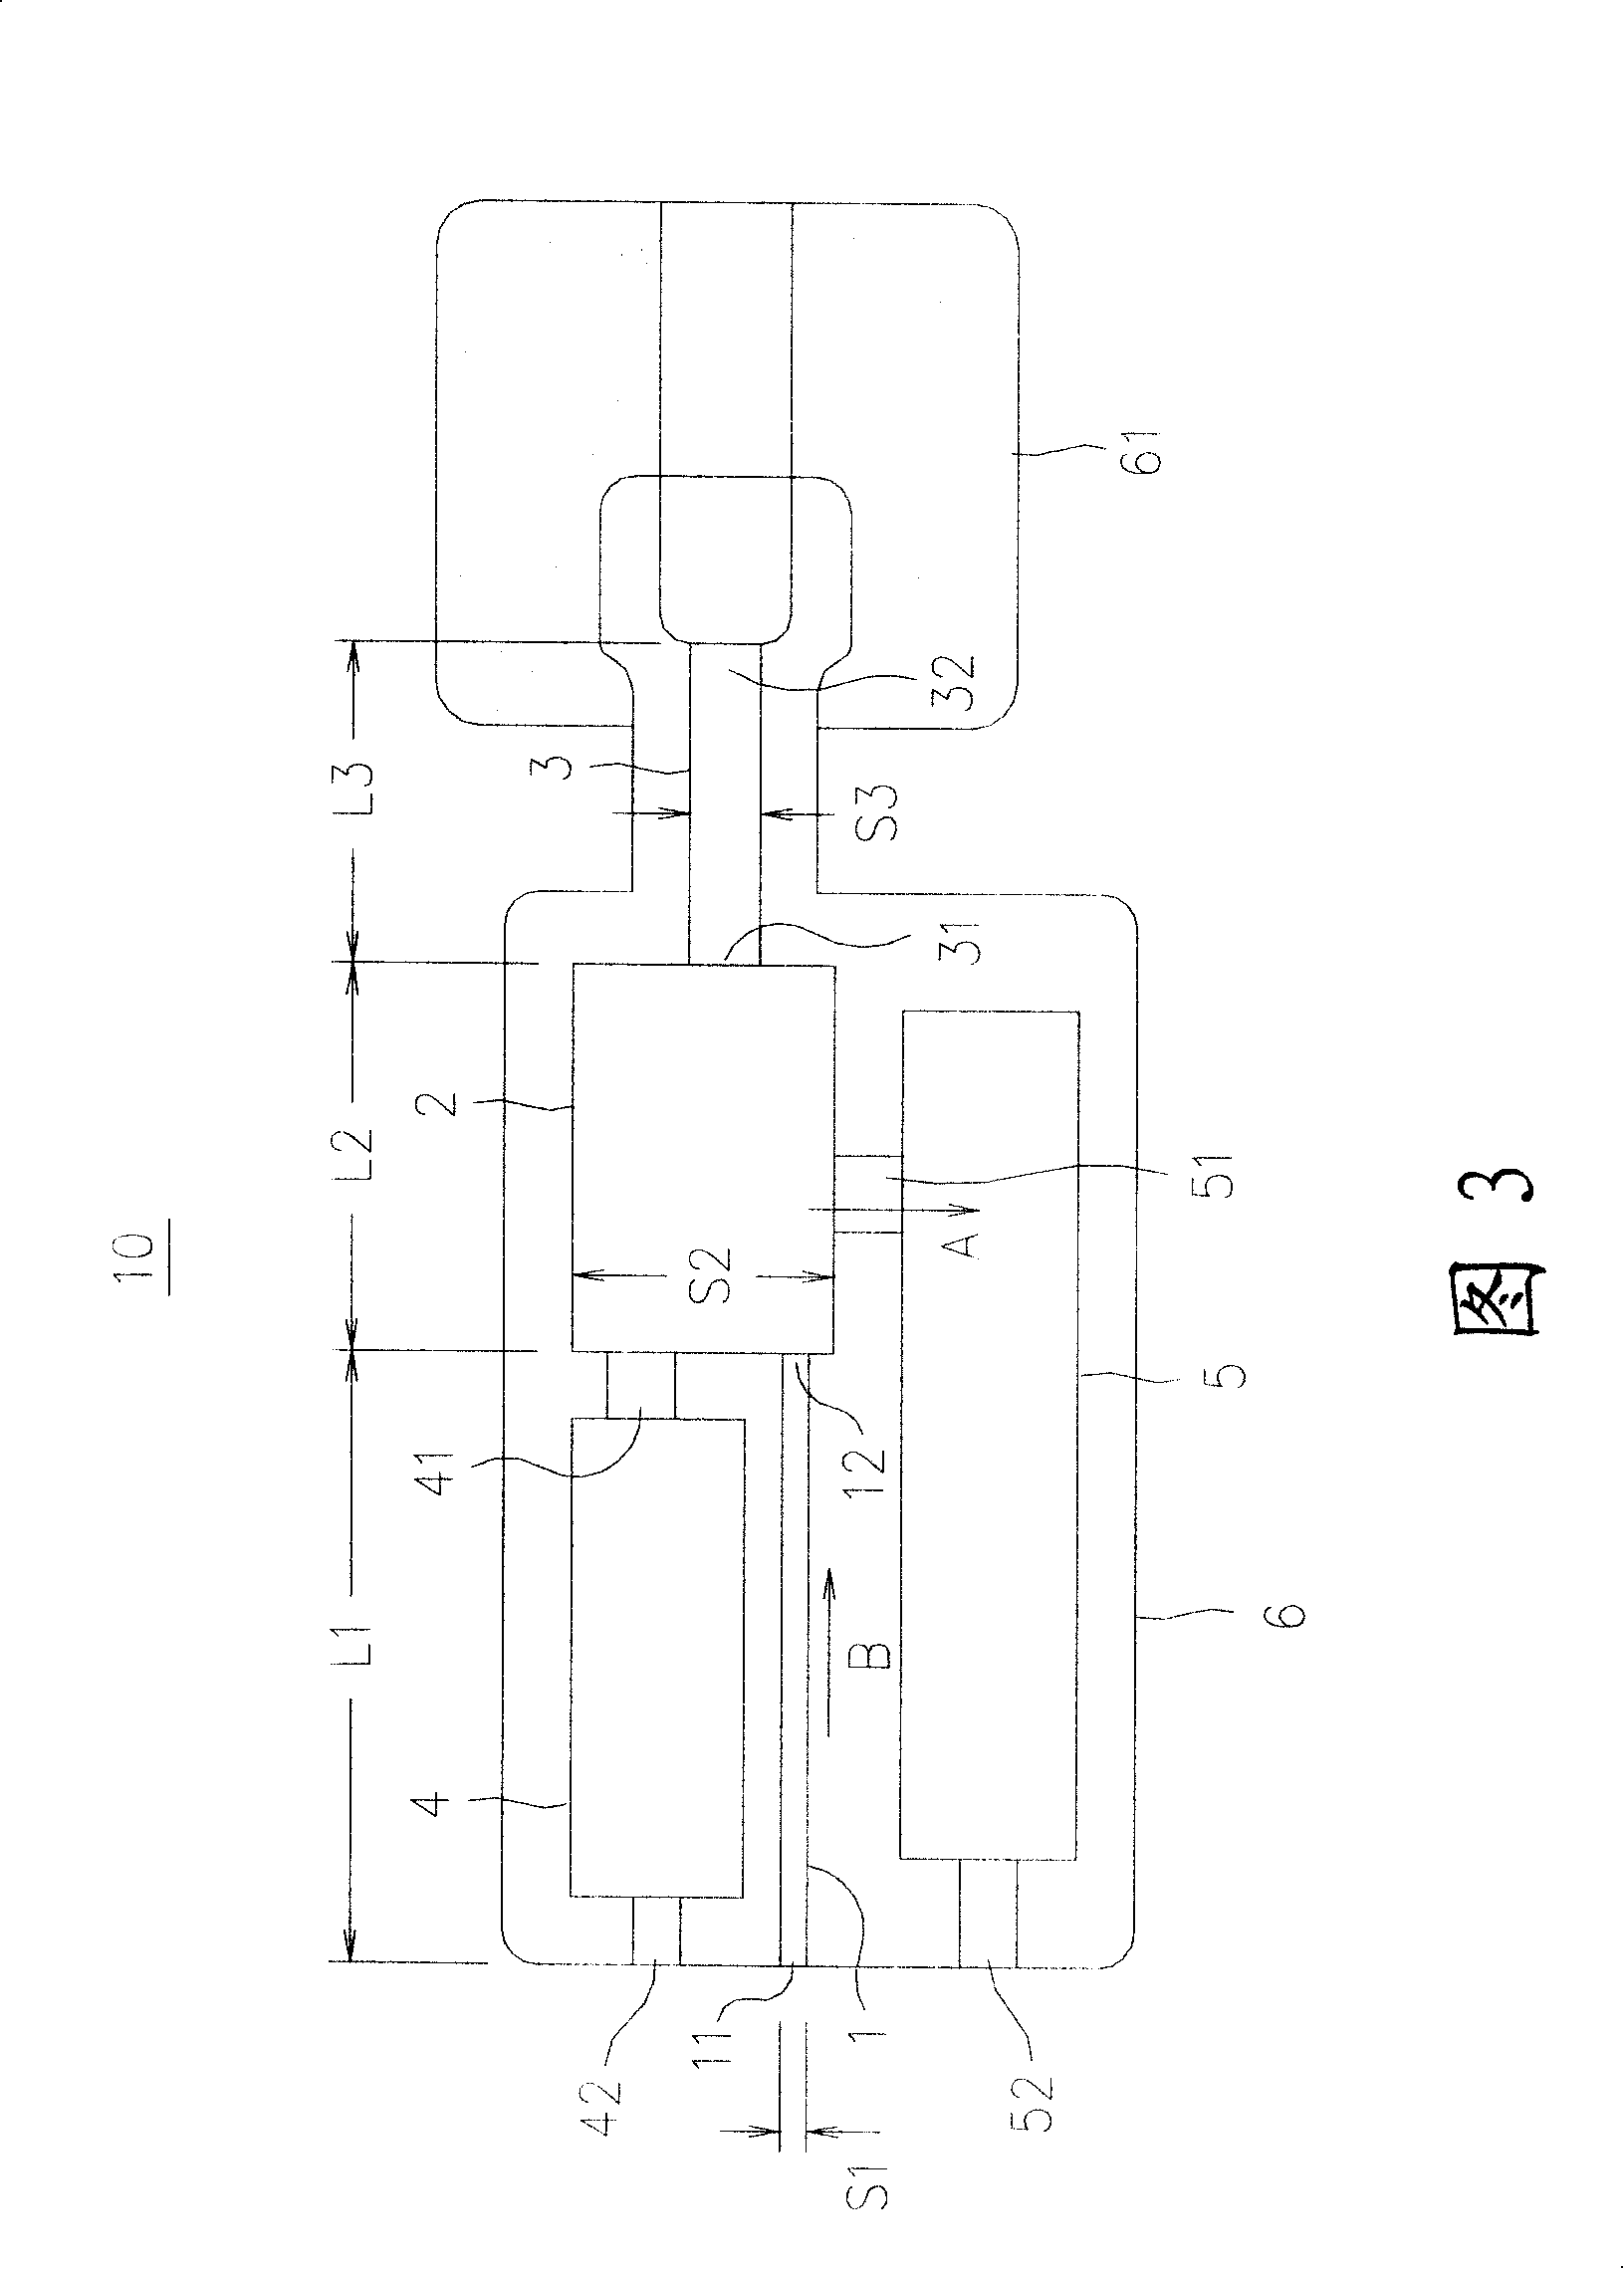 A noise suppression device and method